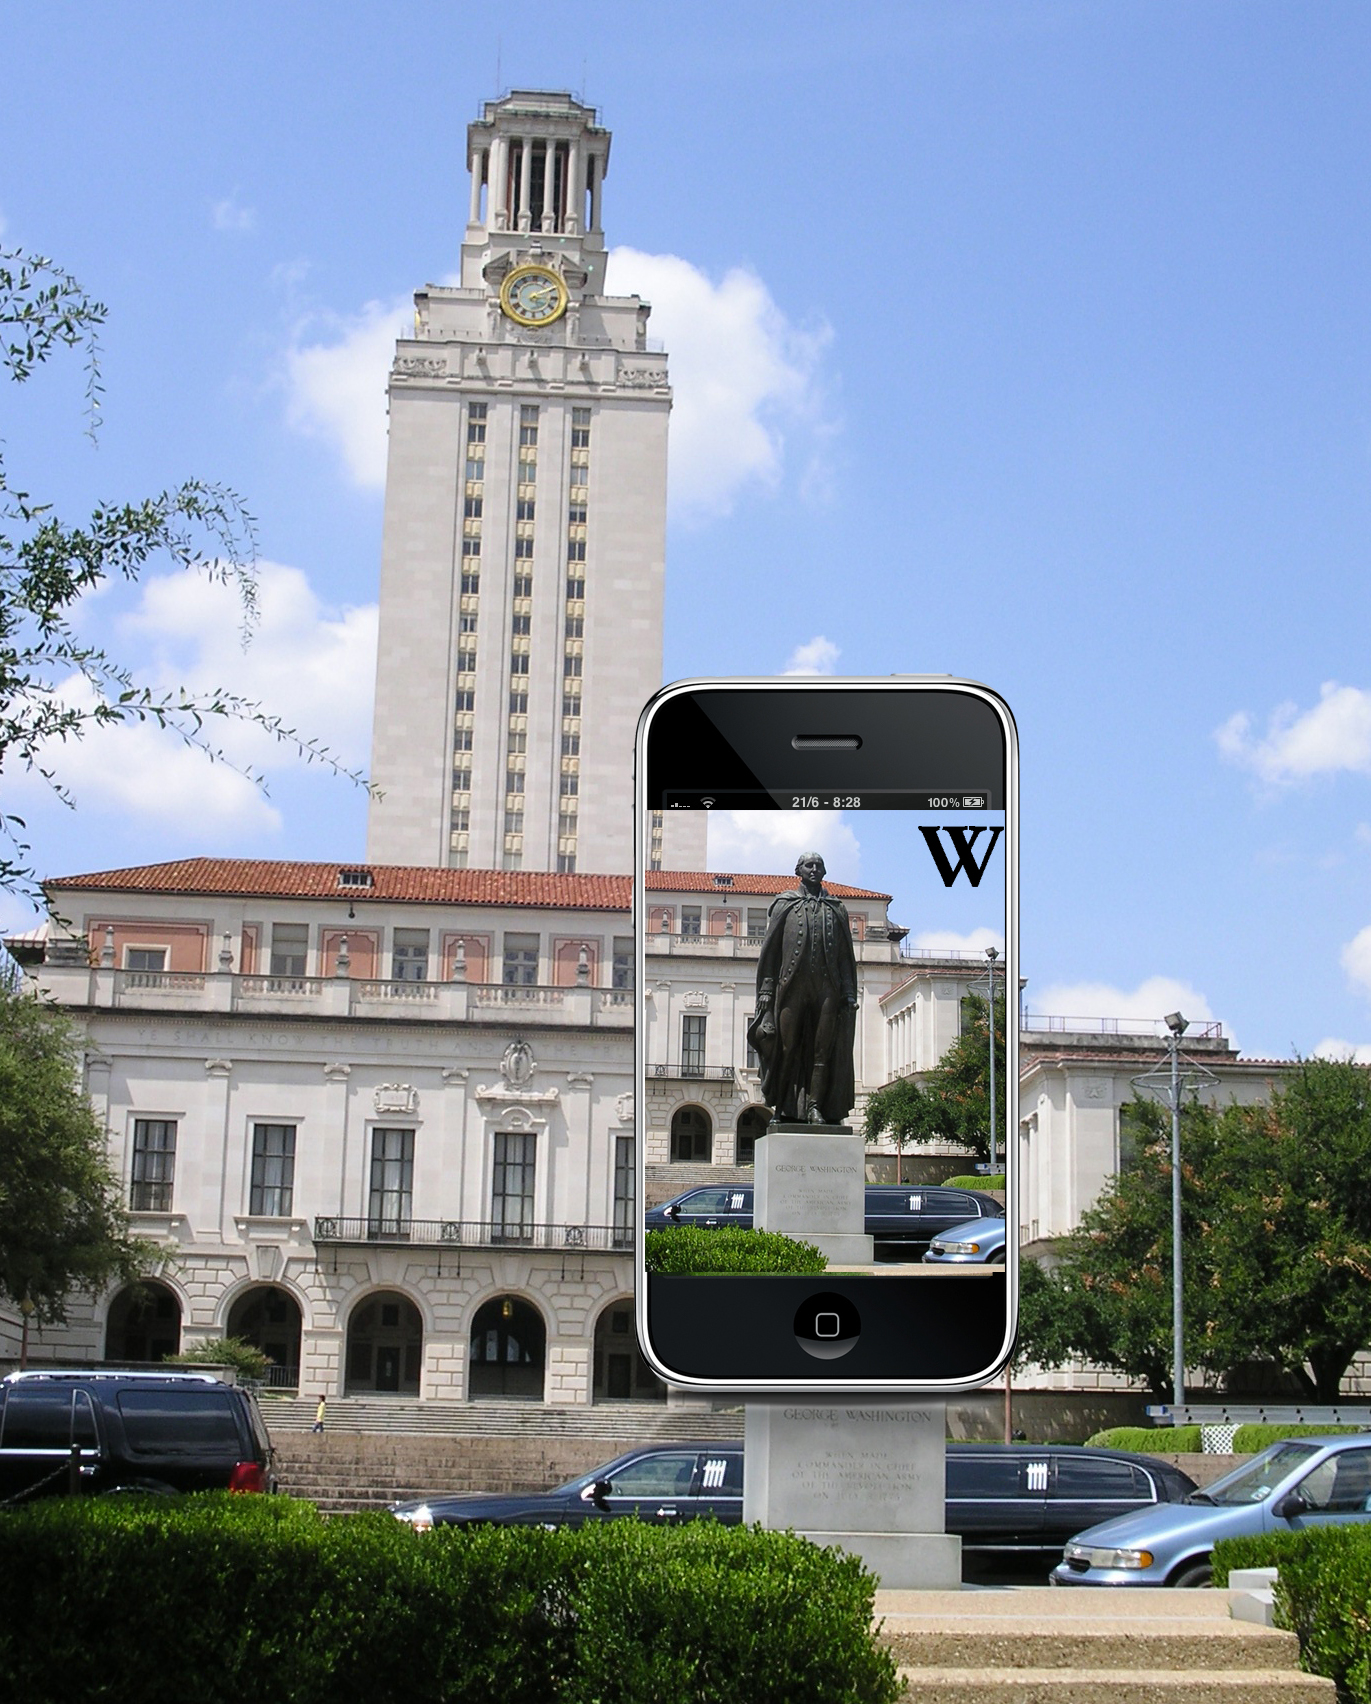 A composite image showing the statue of George Washington at the top of UT's south mall on an iPhone screen. The Main Tower is in the backgound.